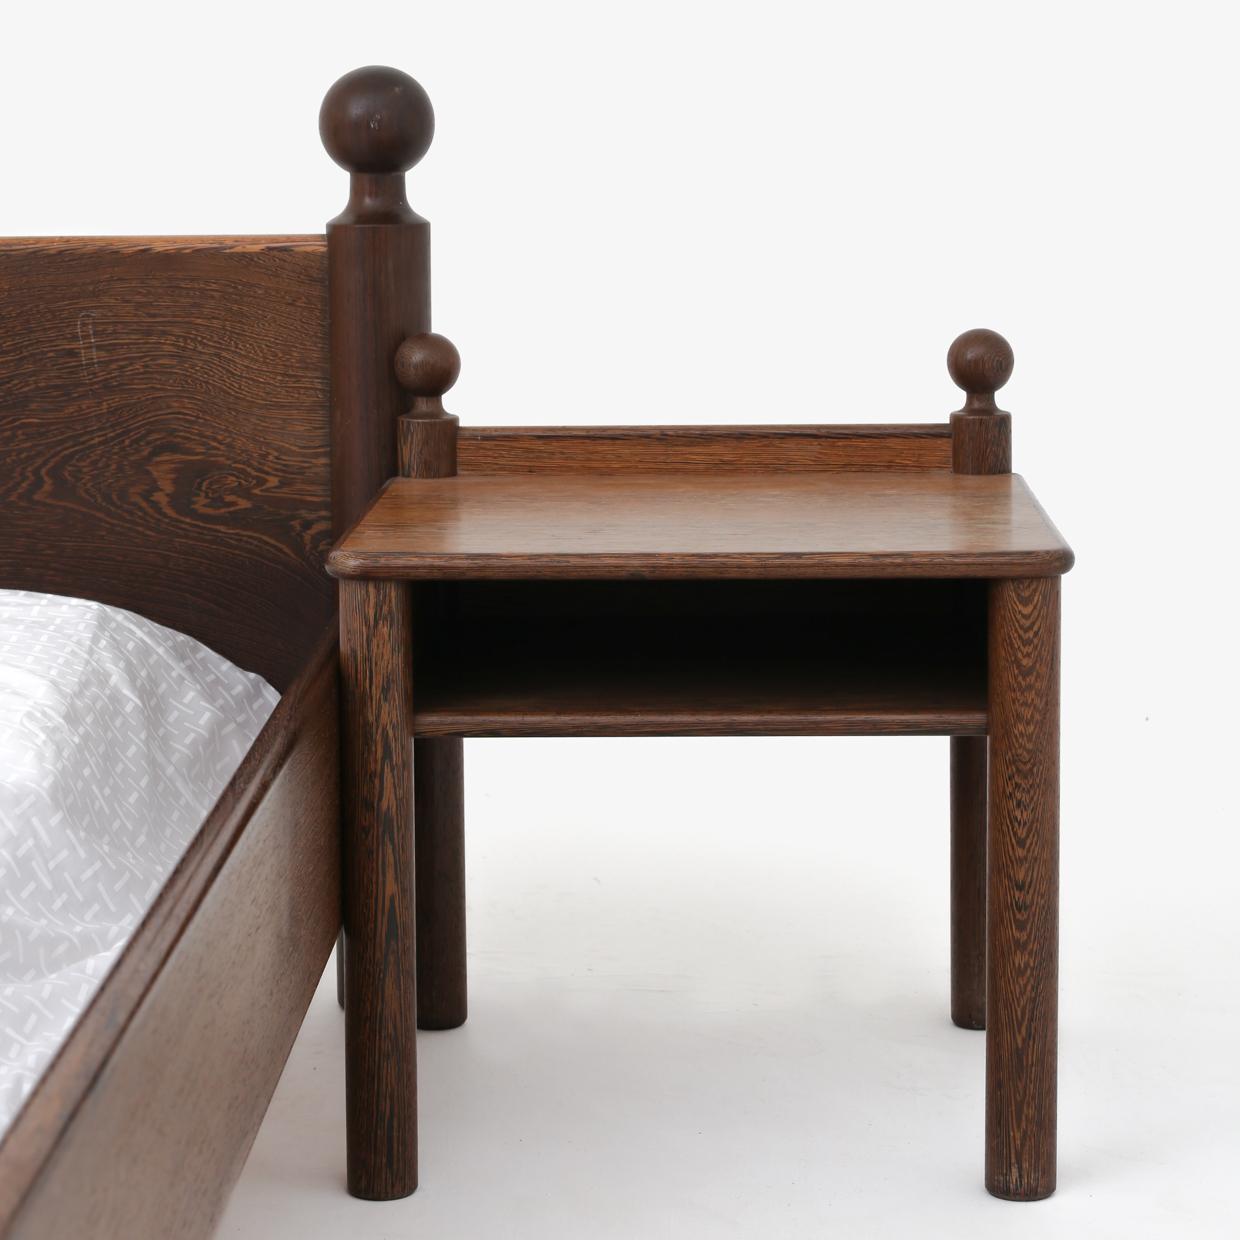 Lacquered Bed Set by Leif Alring and Willy Beck